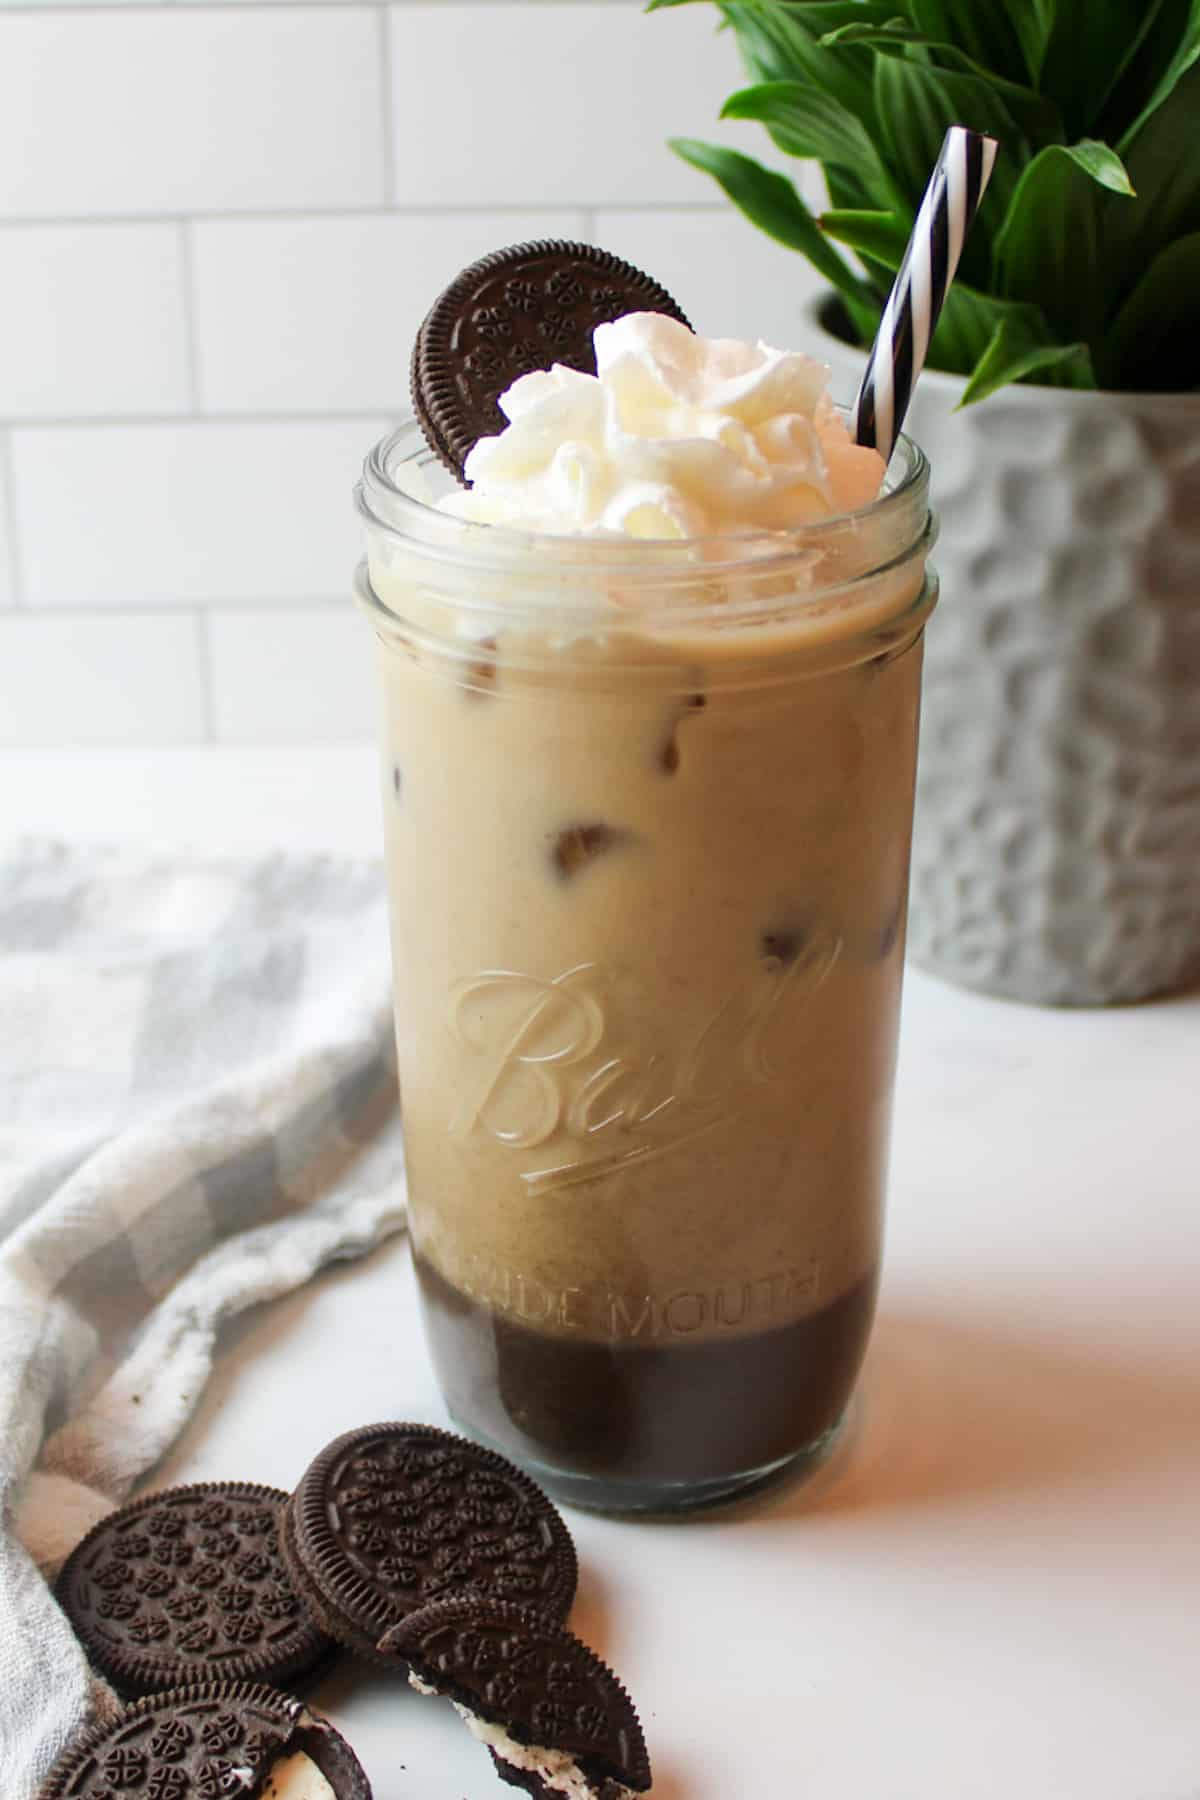 a tall glass cup full of iced oreo coffee and garnished with whipped cream and a cookie.